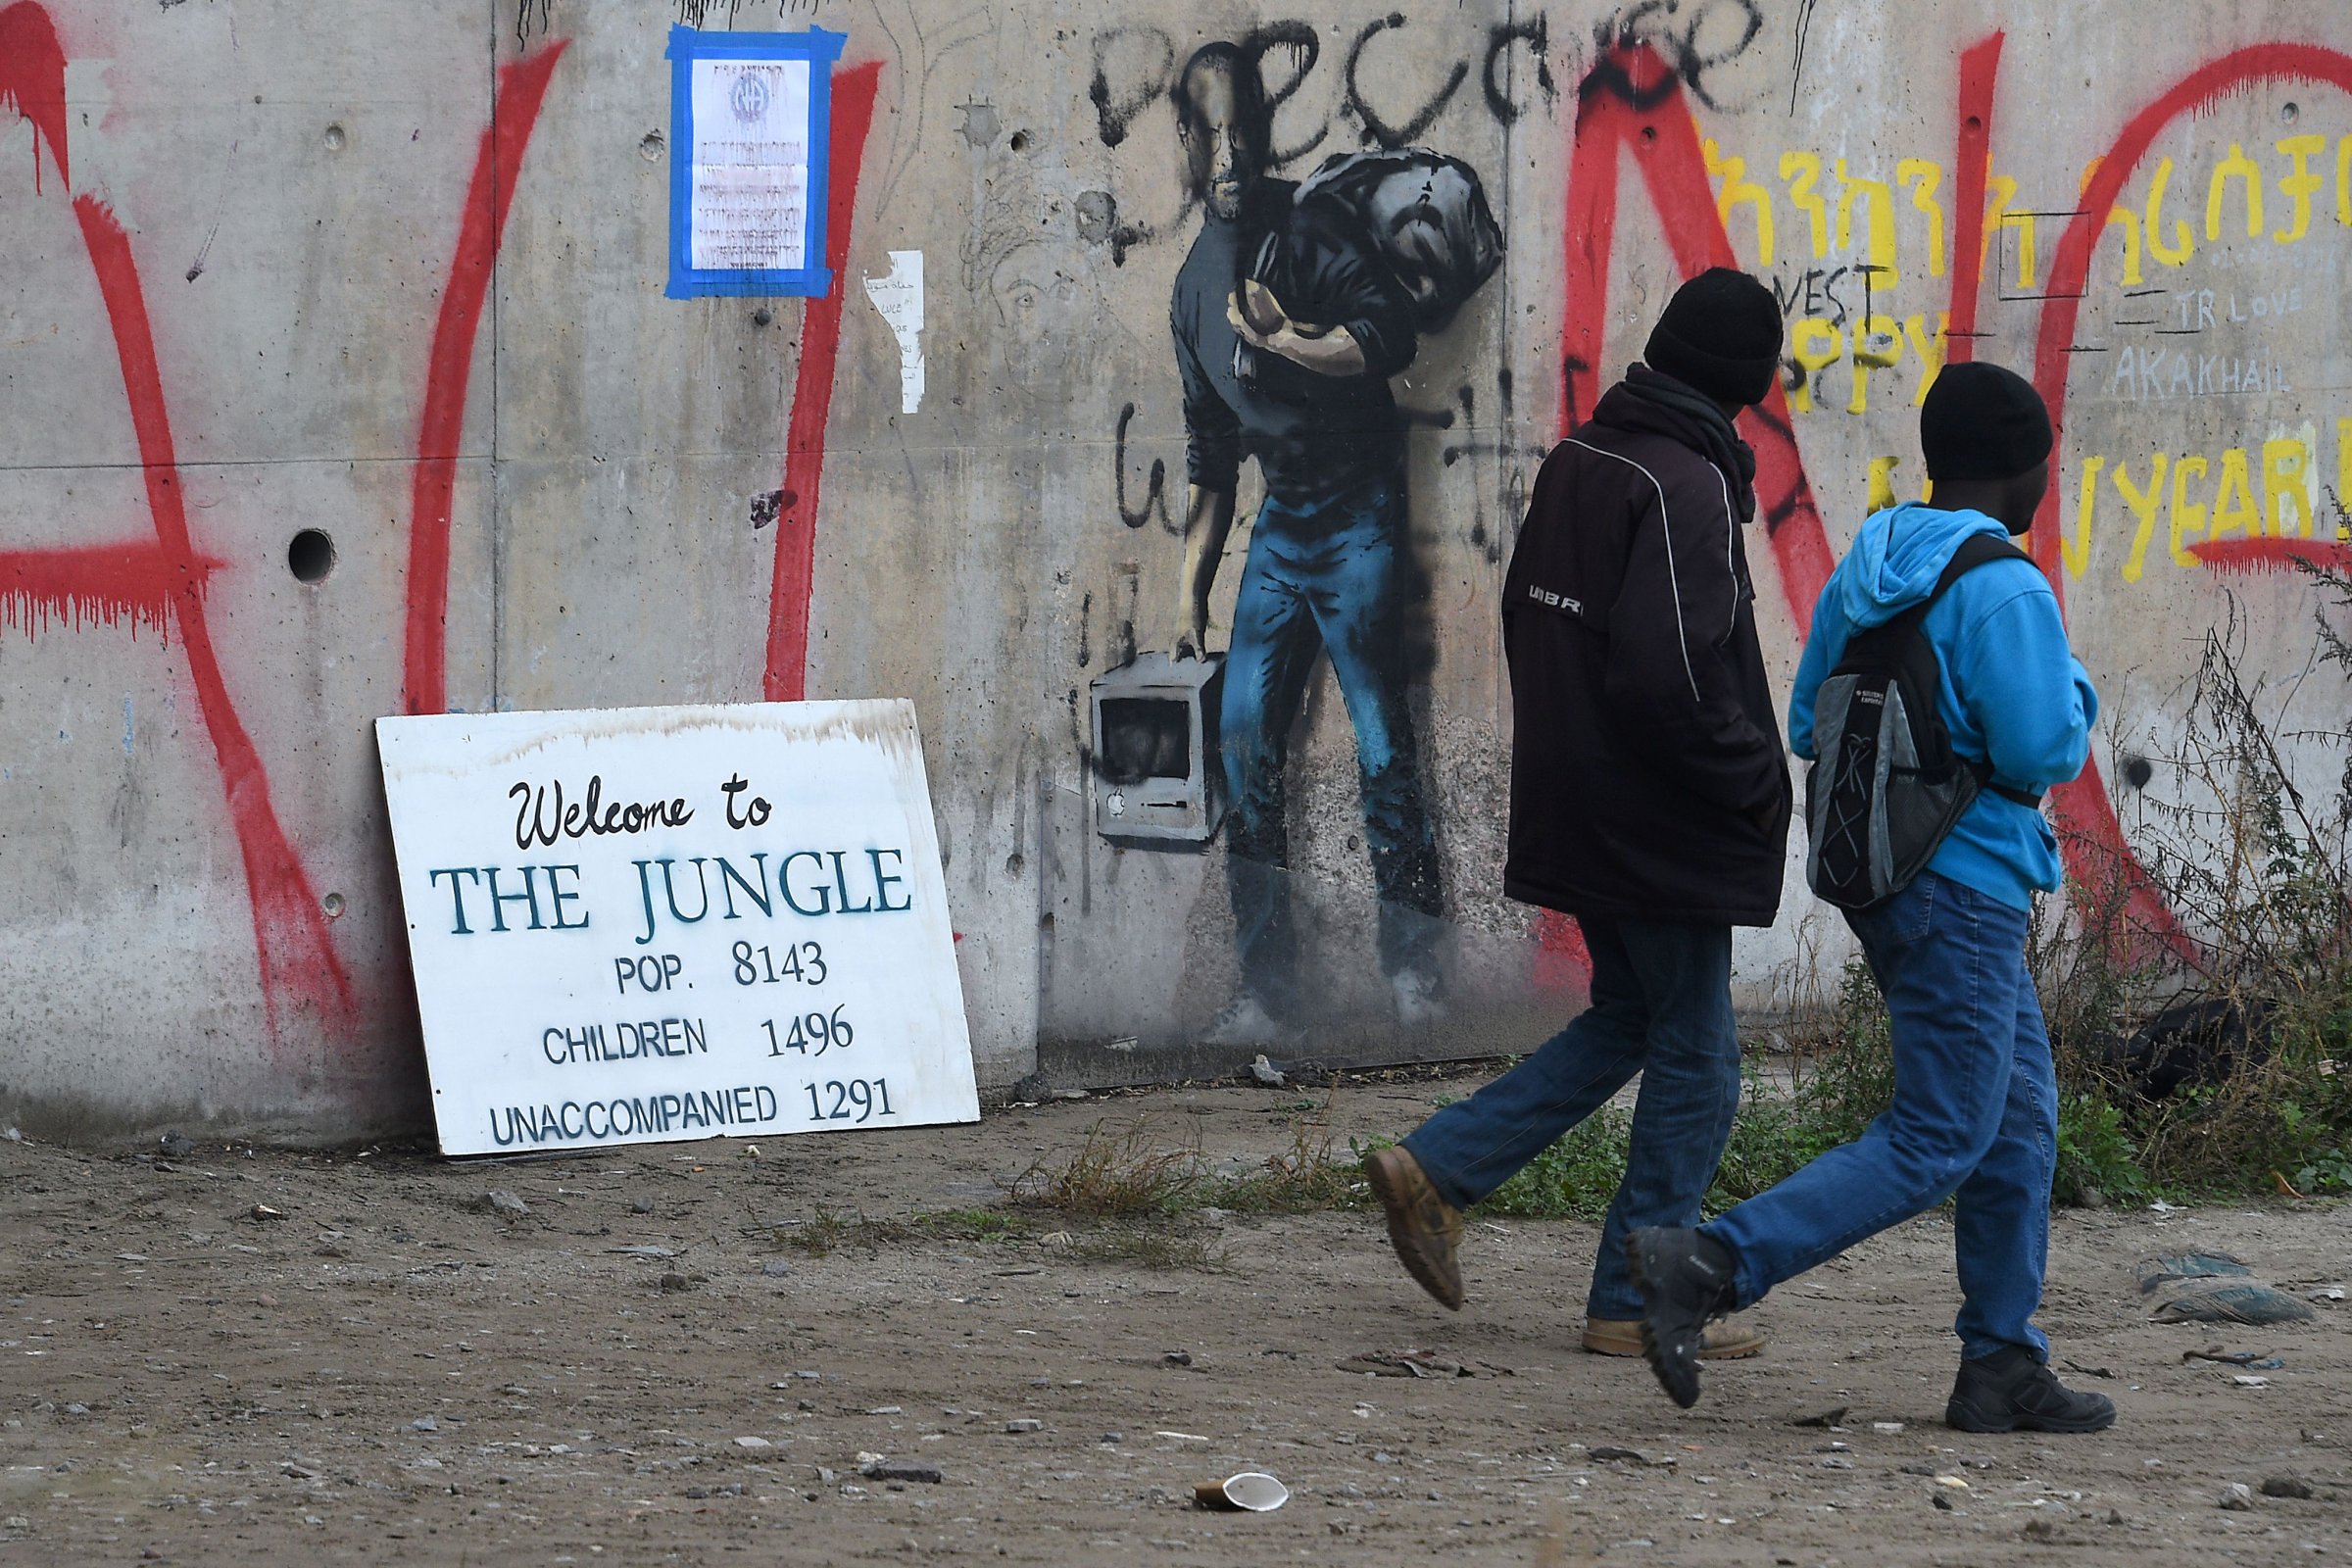 Migrants walk past a graffiti by street artist Banksy representing Apple founder Steve Jobs as a migrant during the full evacuation of the Calais "Jungle" camp, in Calais, northern France, on October 24, 2016.